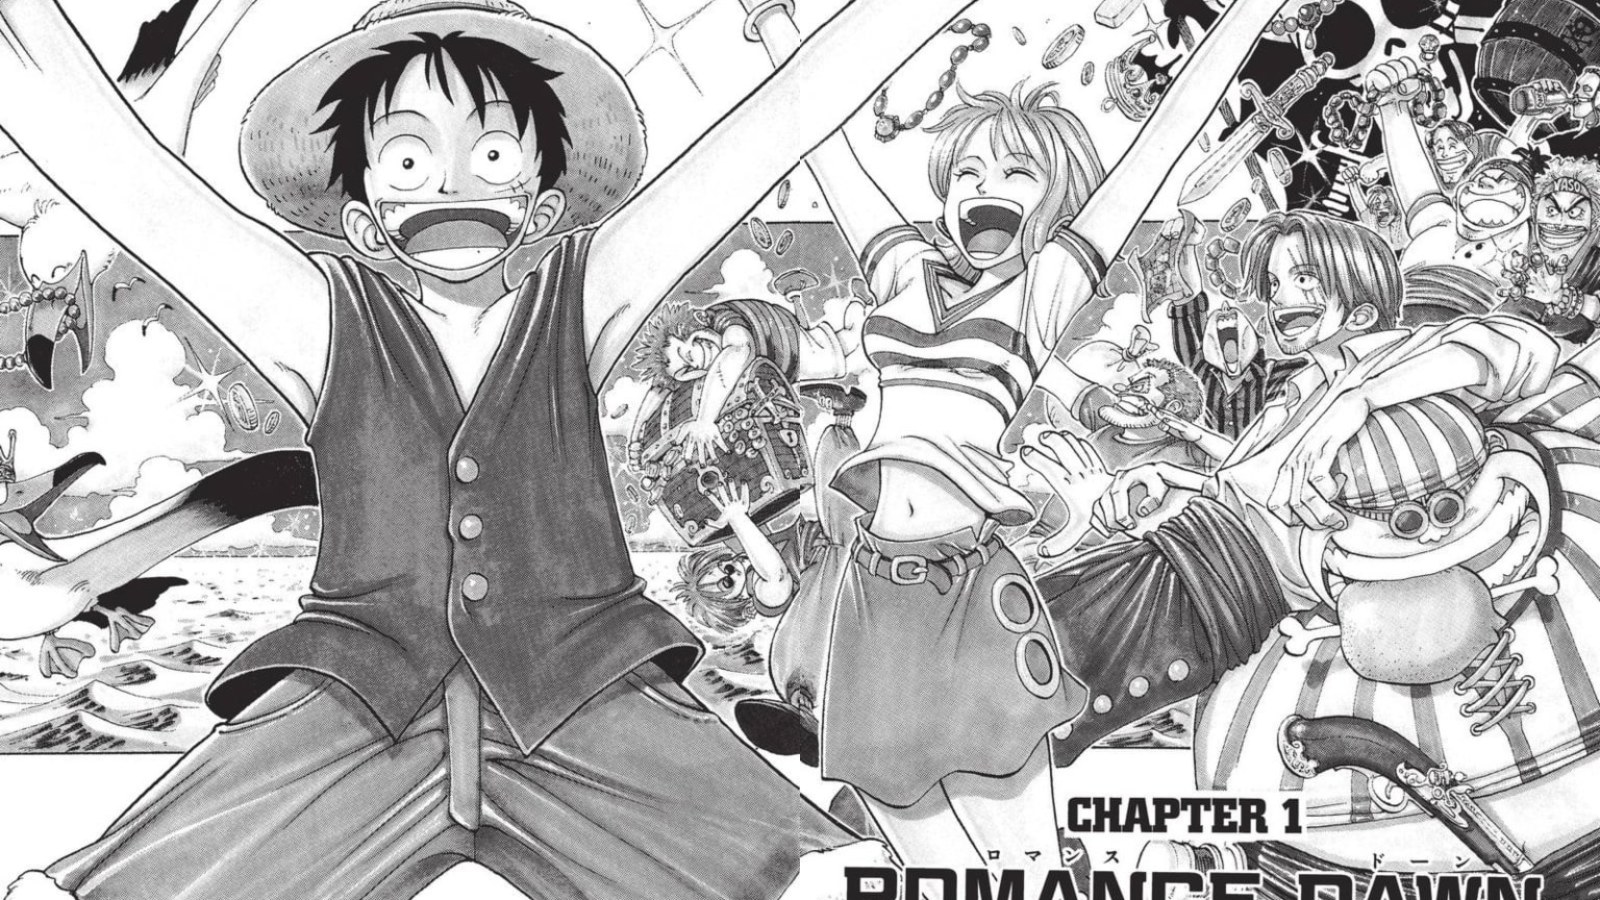 Read One Piece Manga From The Beginning With Chapter 1 And Revisit Monkey D Luffy S Origins